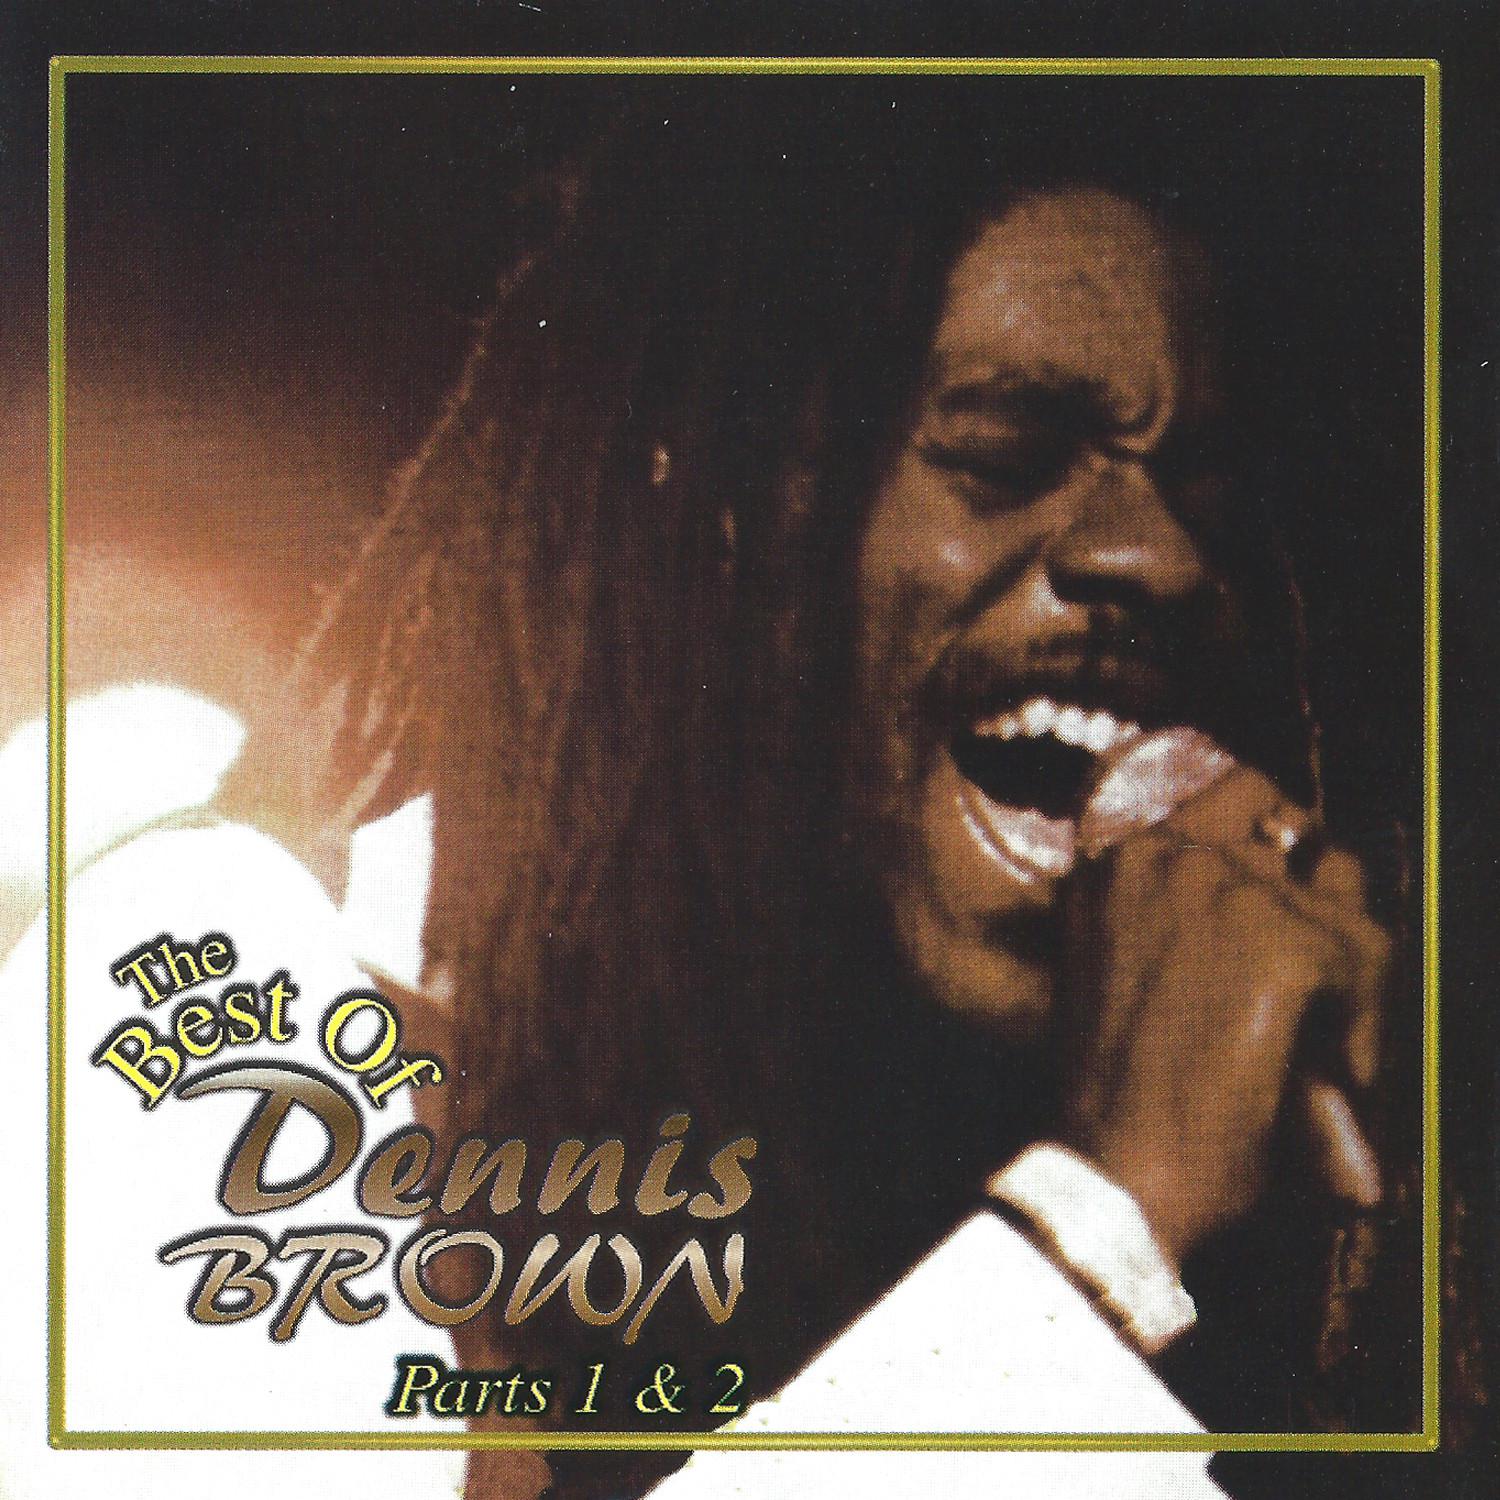 The Best of Dennis Brown, Parts 1 & 2